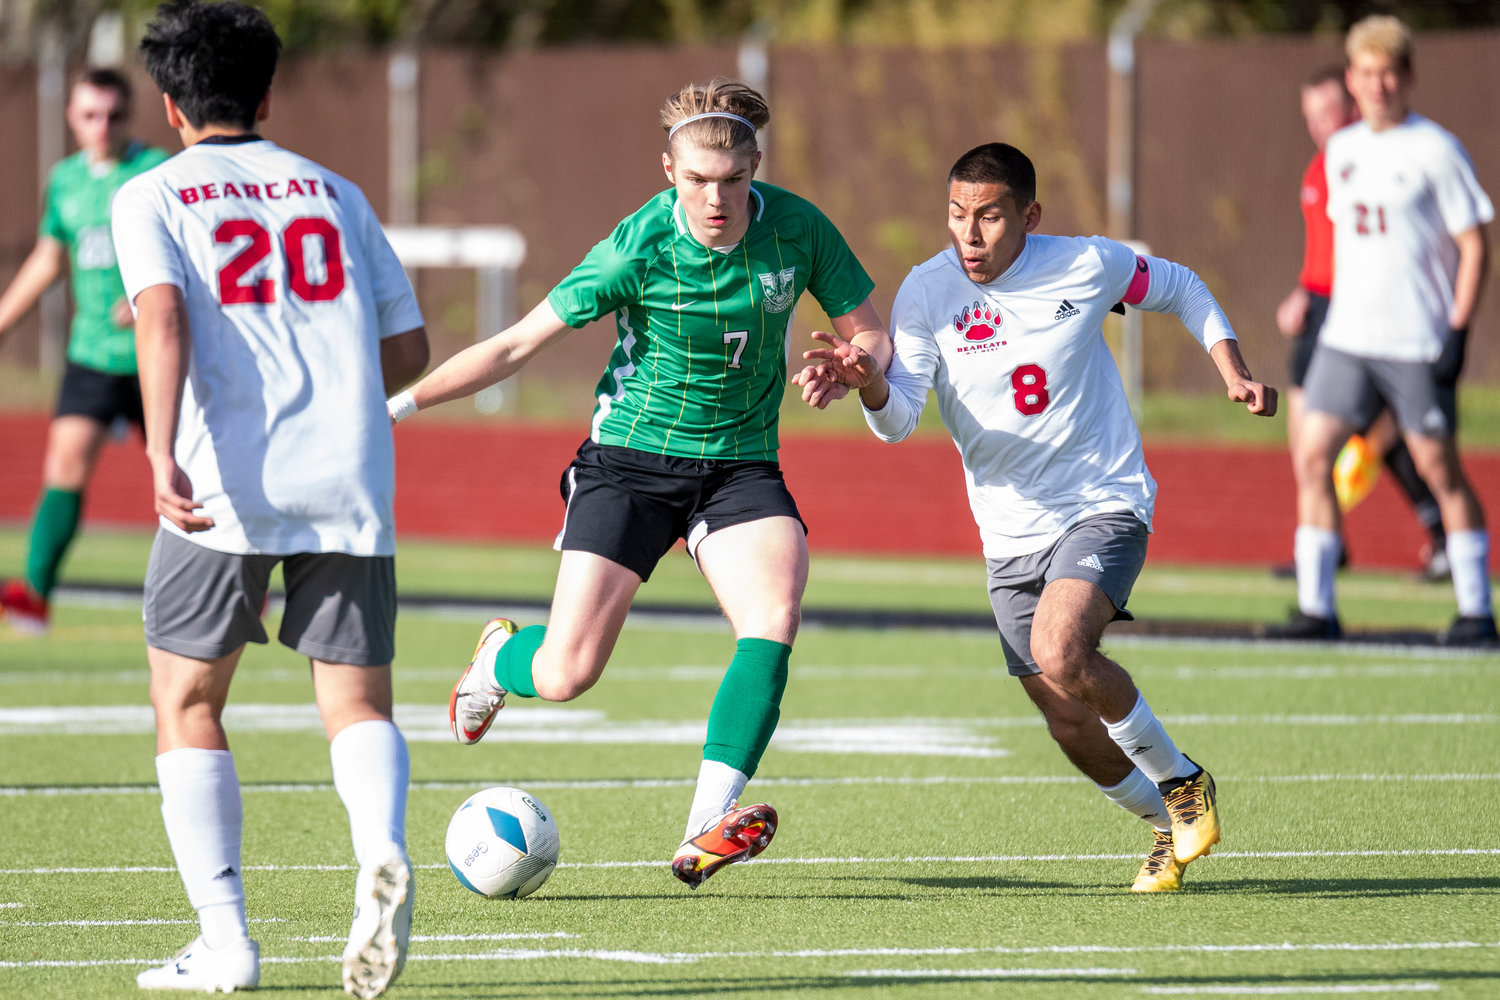 Tumwater's Myles Leneker (7) and W.F. West's Elvis Leal Perez (8) battle for possession during the 2A District IV semifinals in Tumwater on May 12.